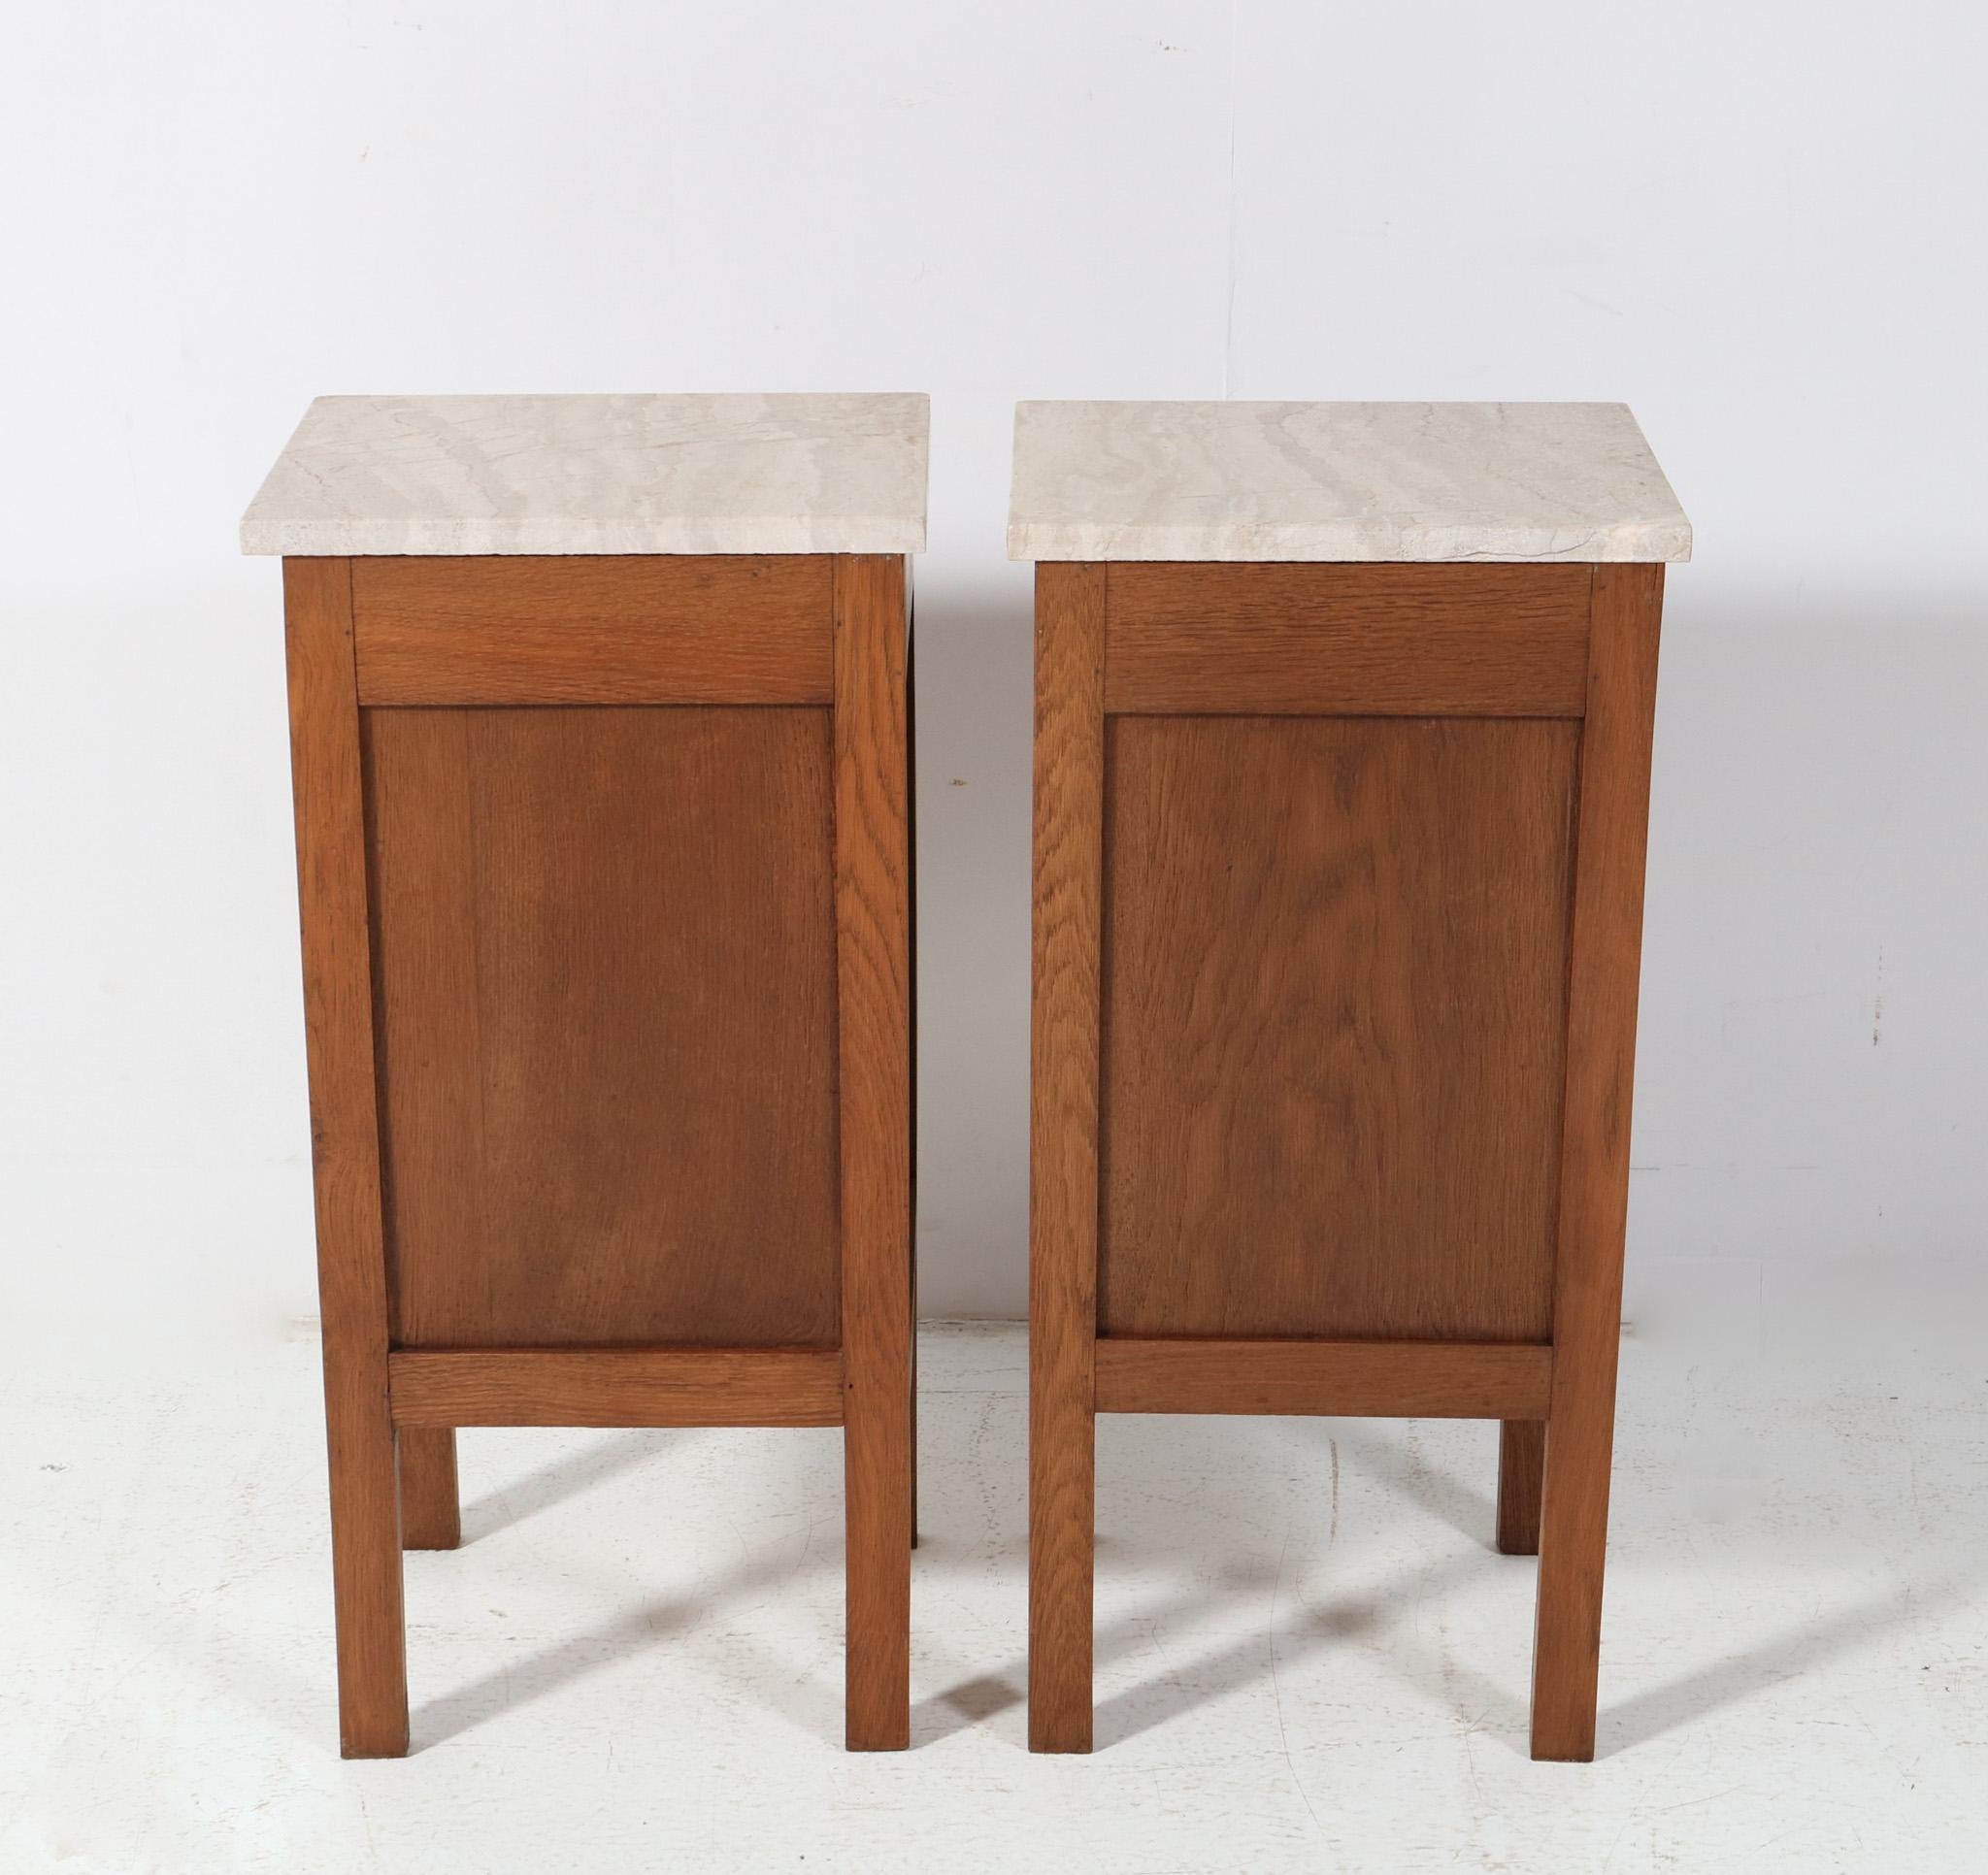 Two Arts & Crafts Art Nouveau Oak Nightstands or Bedside Tables, 1900s For Sale 2